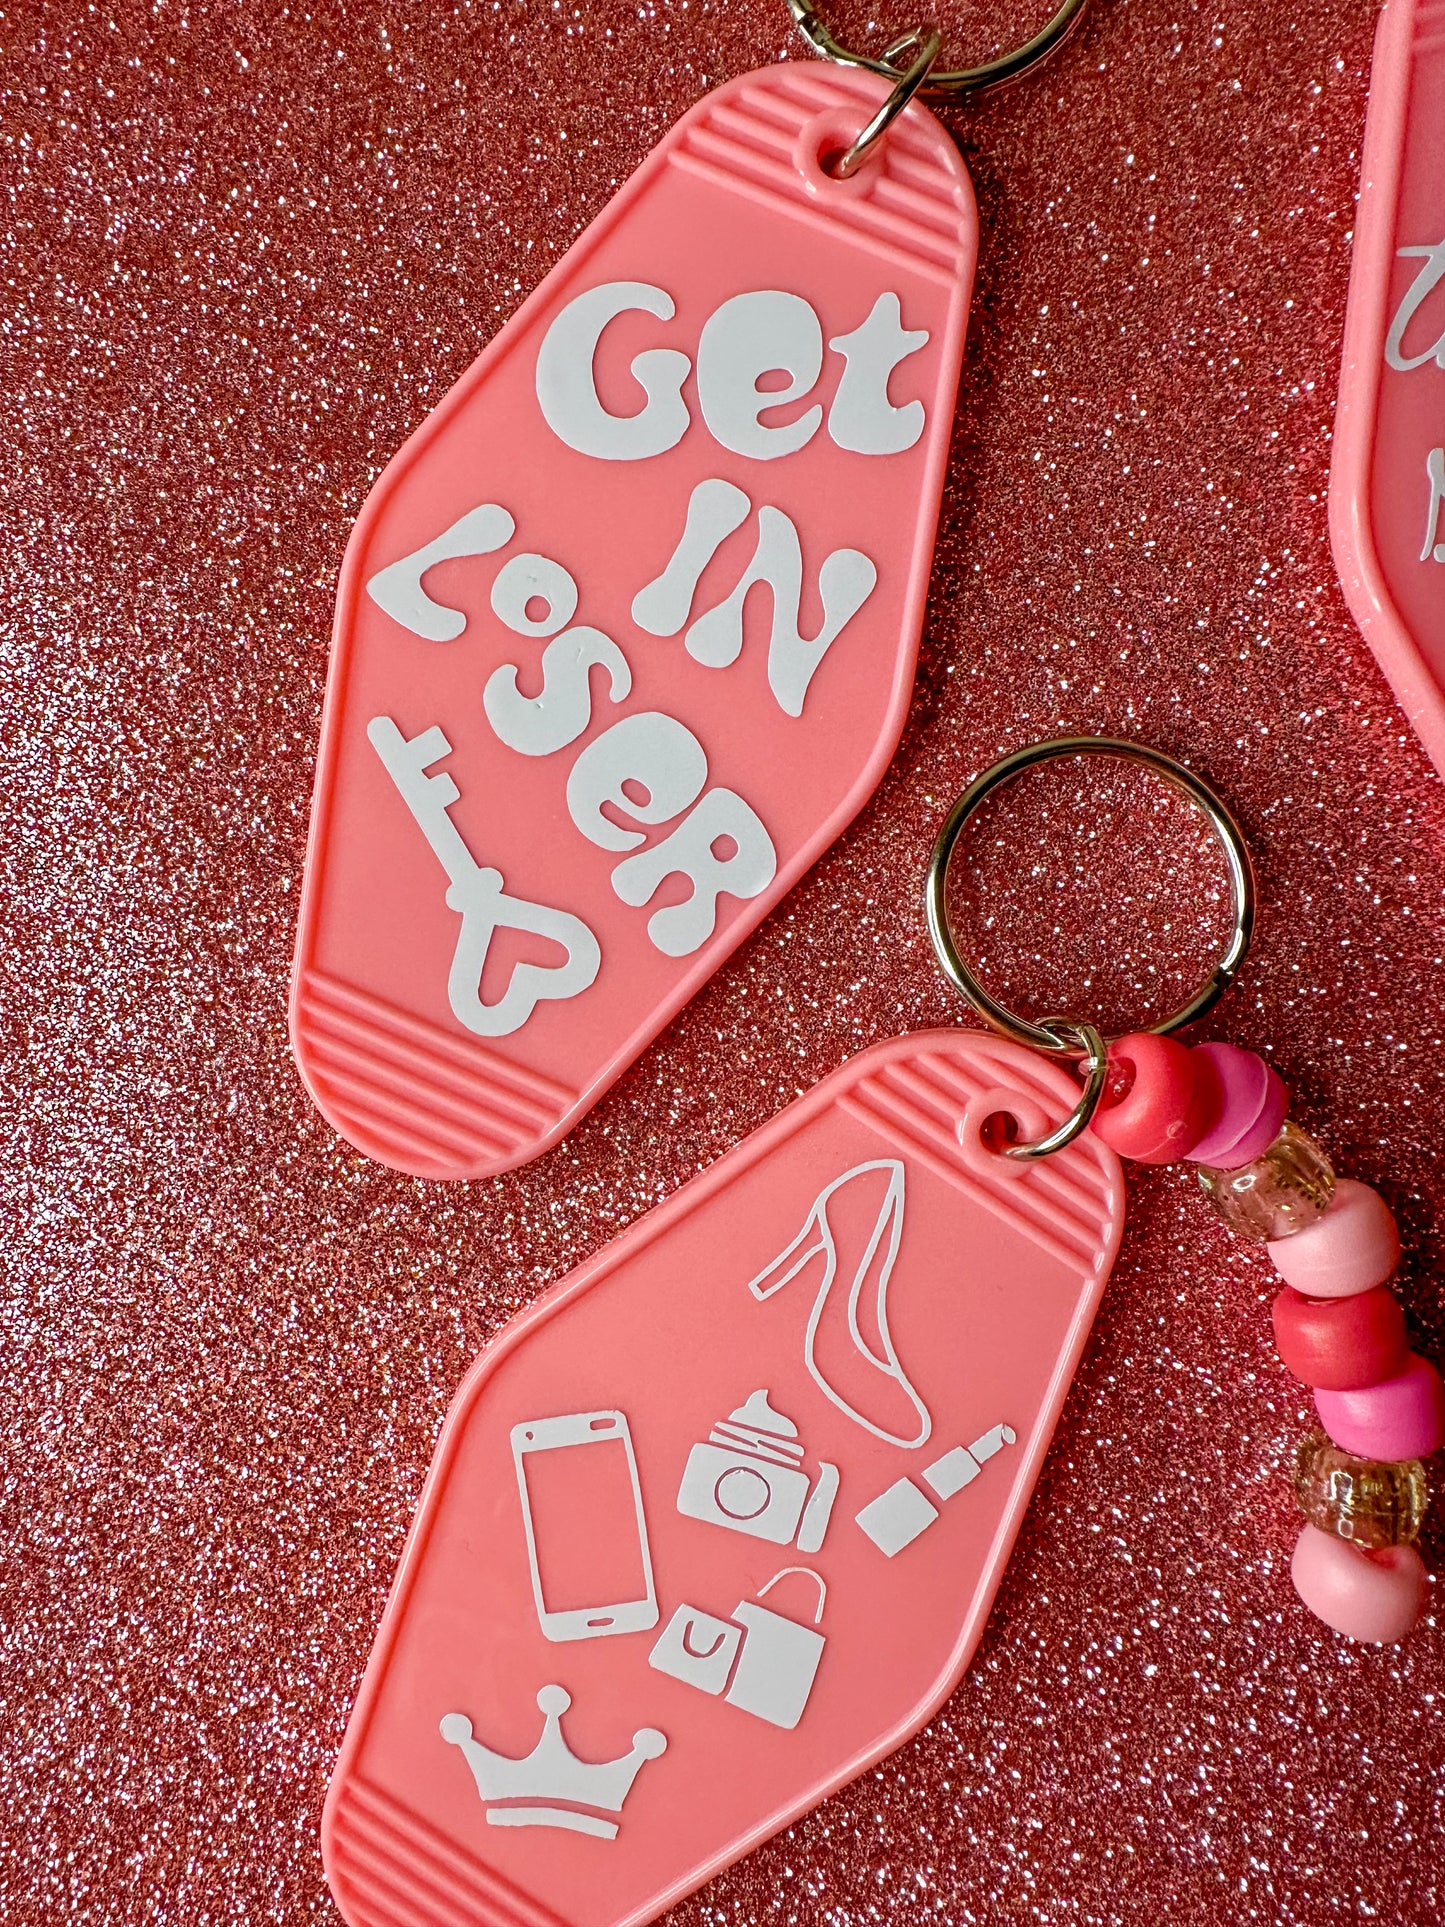 Get in Loser & That's so Fetch Keychains | Mean Girls 2024 Pink Plastic Cute Hotel Keychain